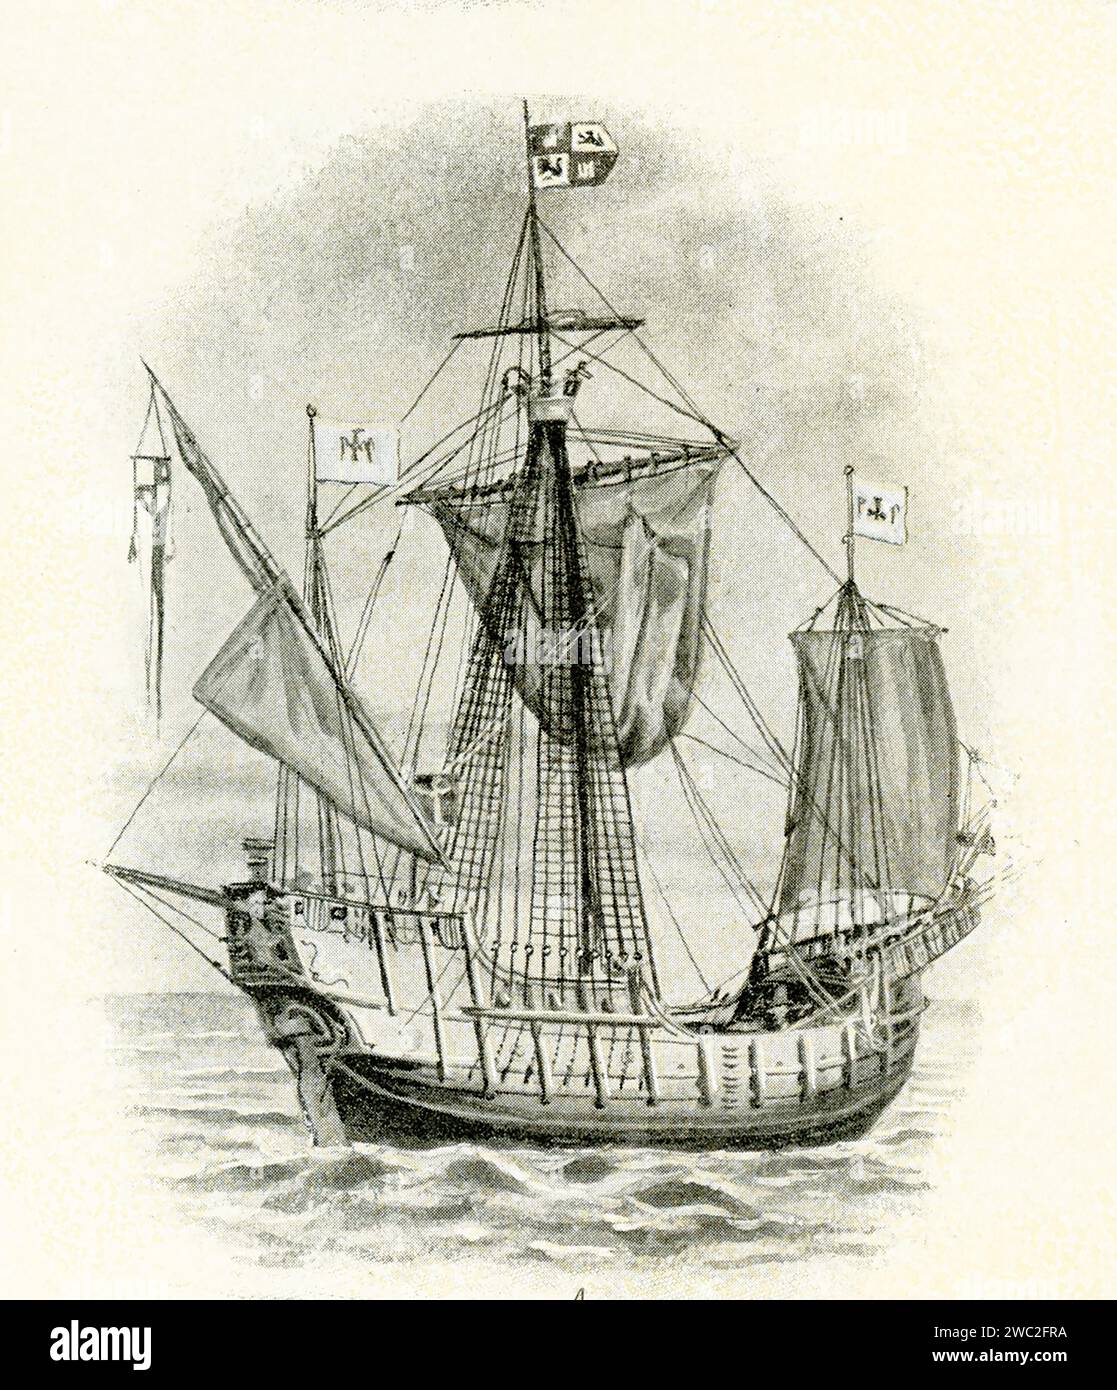 Caravel from the time of Christopher Columbus 15th and 16th centuries. The caravel is a small maneuverable sailing ship, especially used in the 15th century by the Portuguese to explore along the West African coast and into the Atlantic Ocean. The lateen sails gave it speed and the capacity for sailing windward. Stock Photo